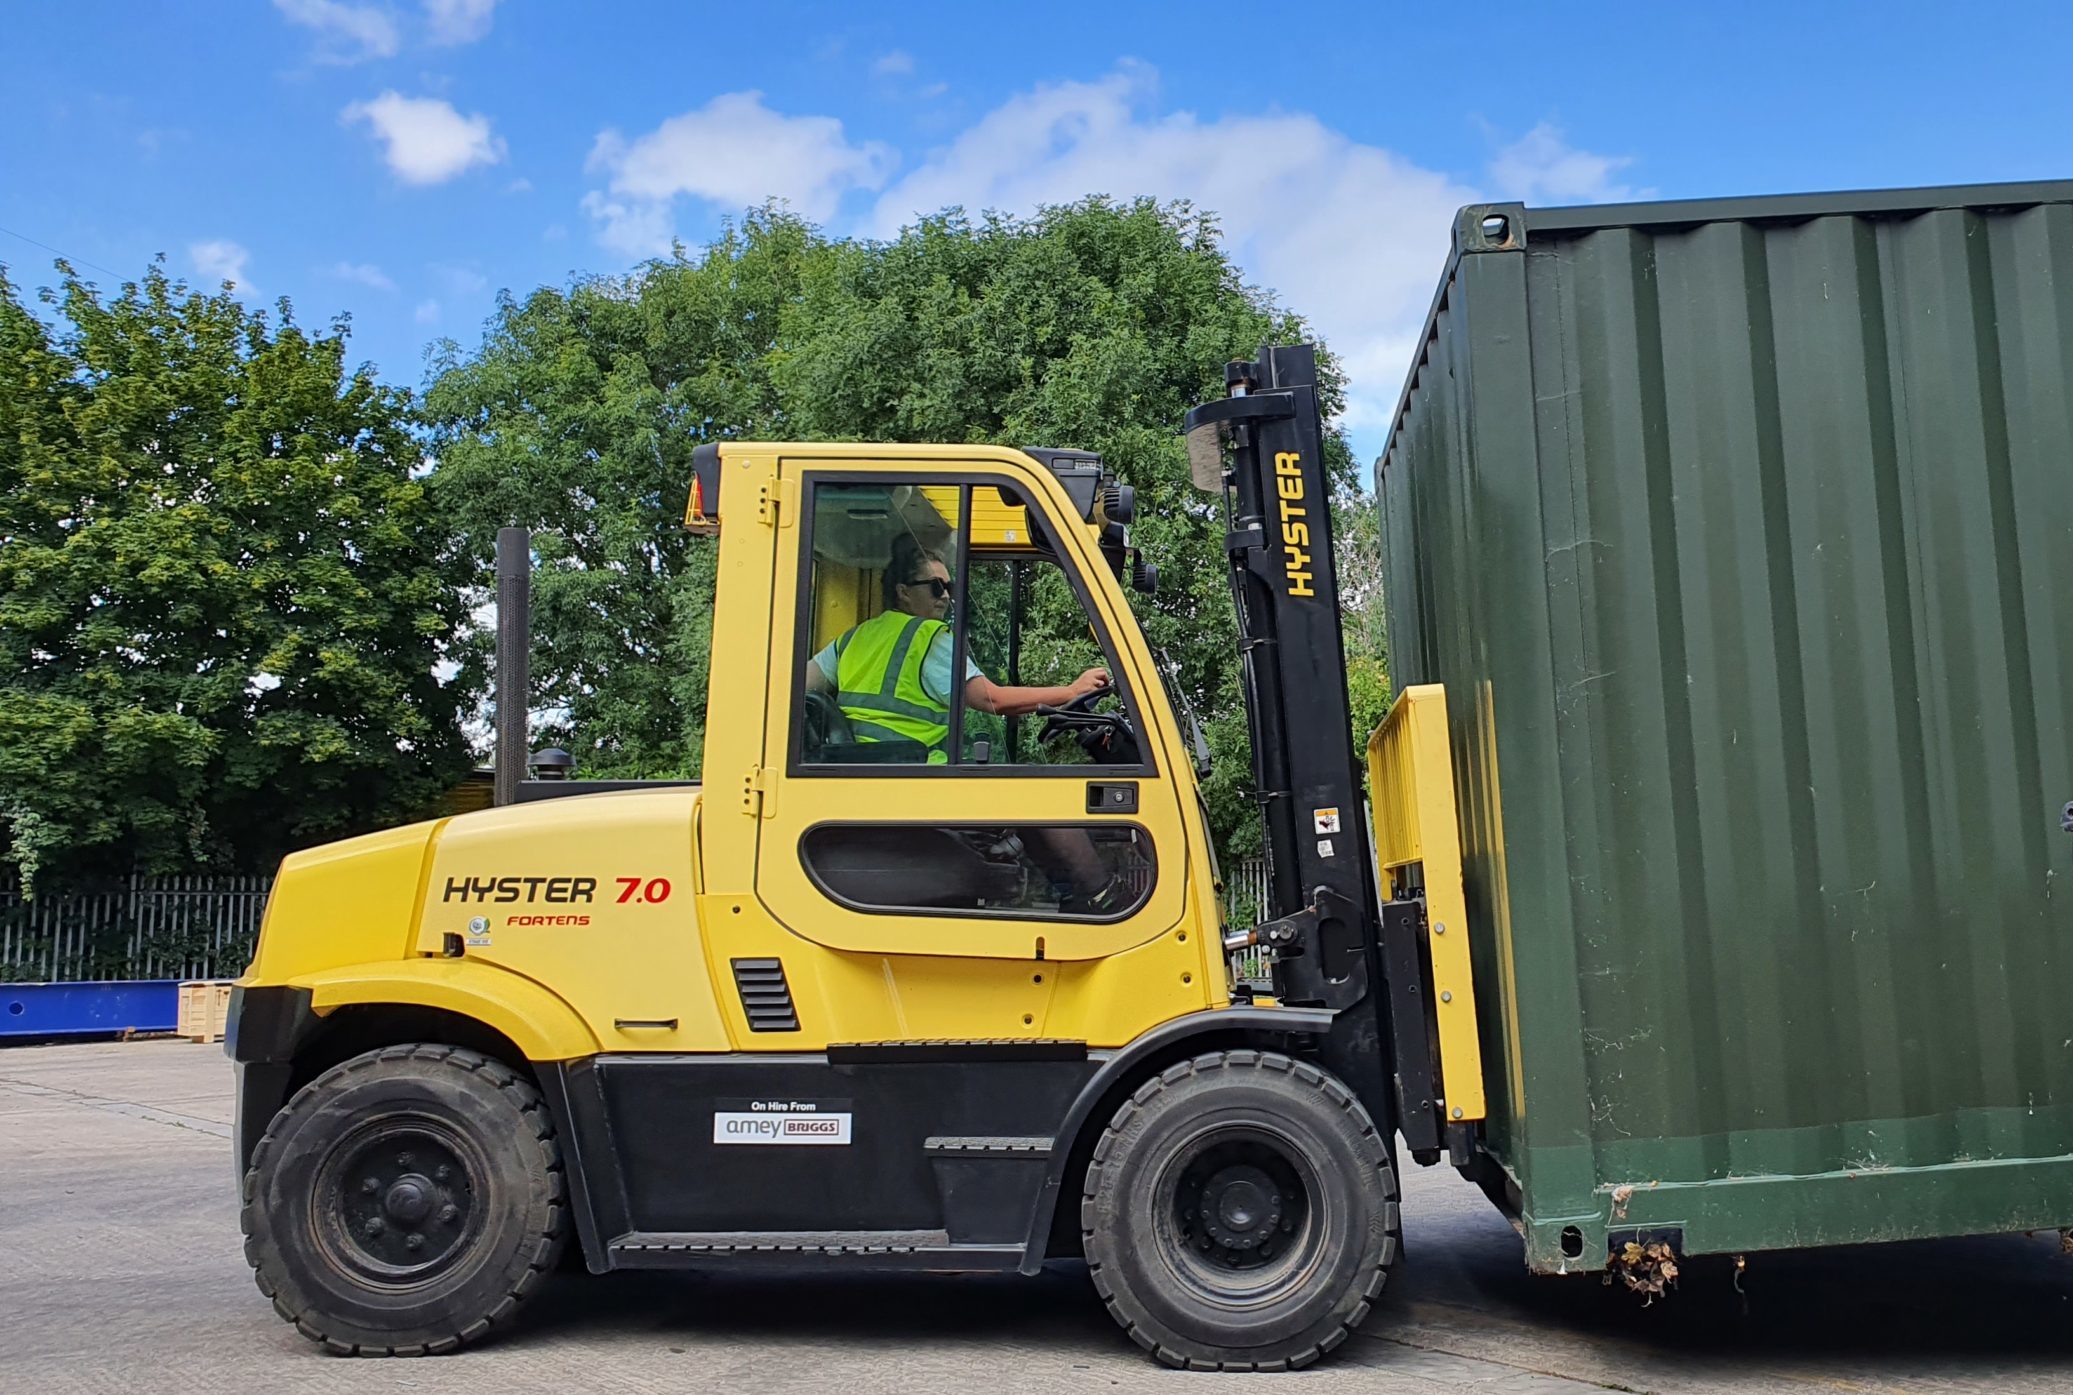 Counterbalance lift truck carrying a green shipping container